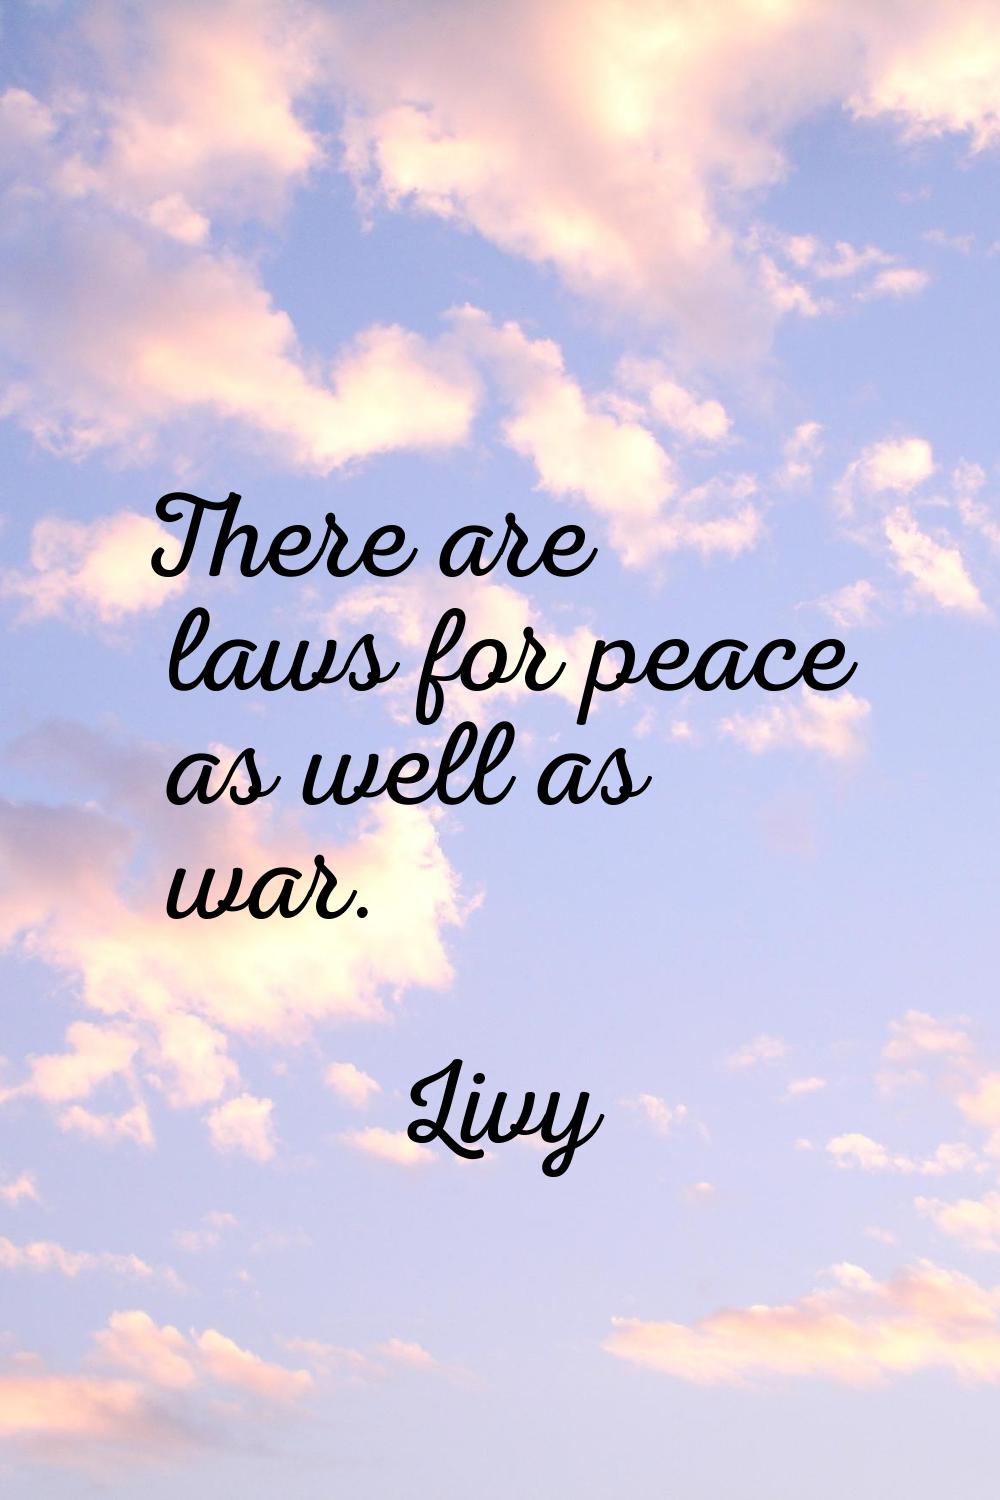 There are laws for peace as well as war.